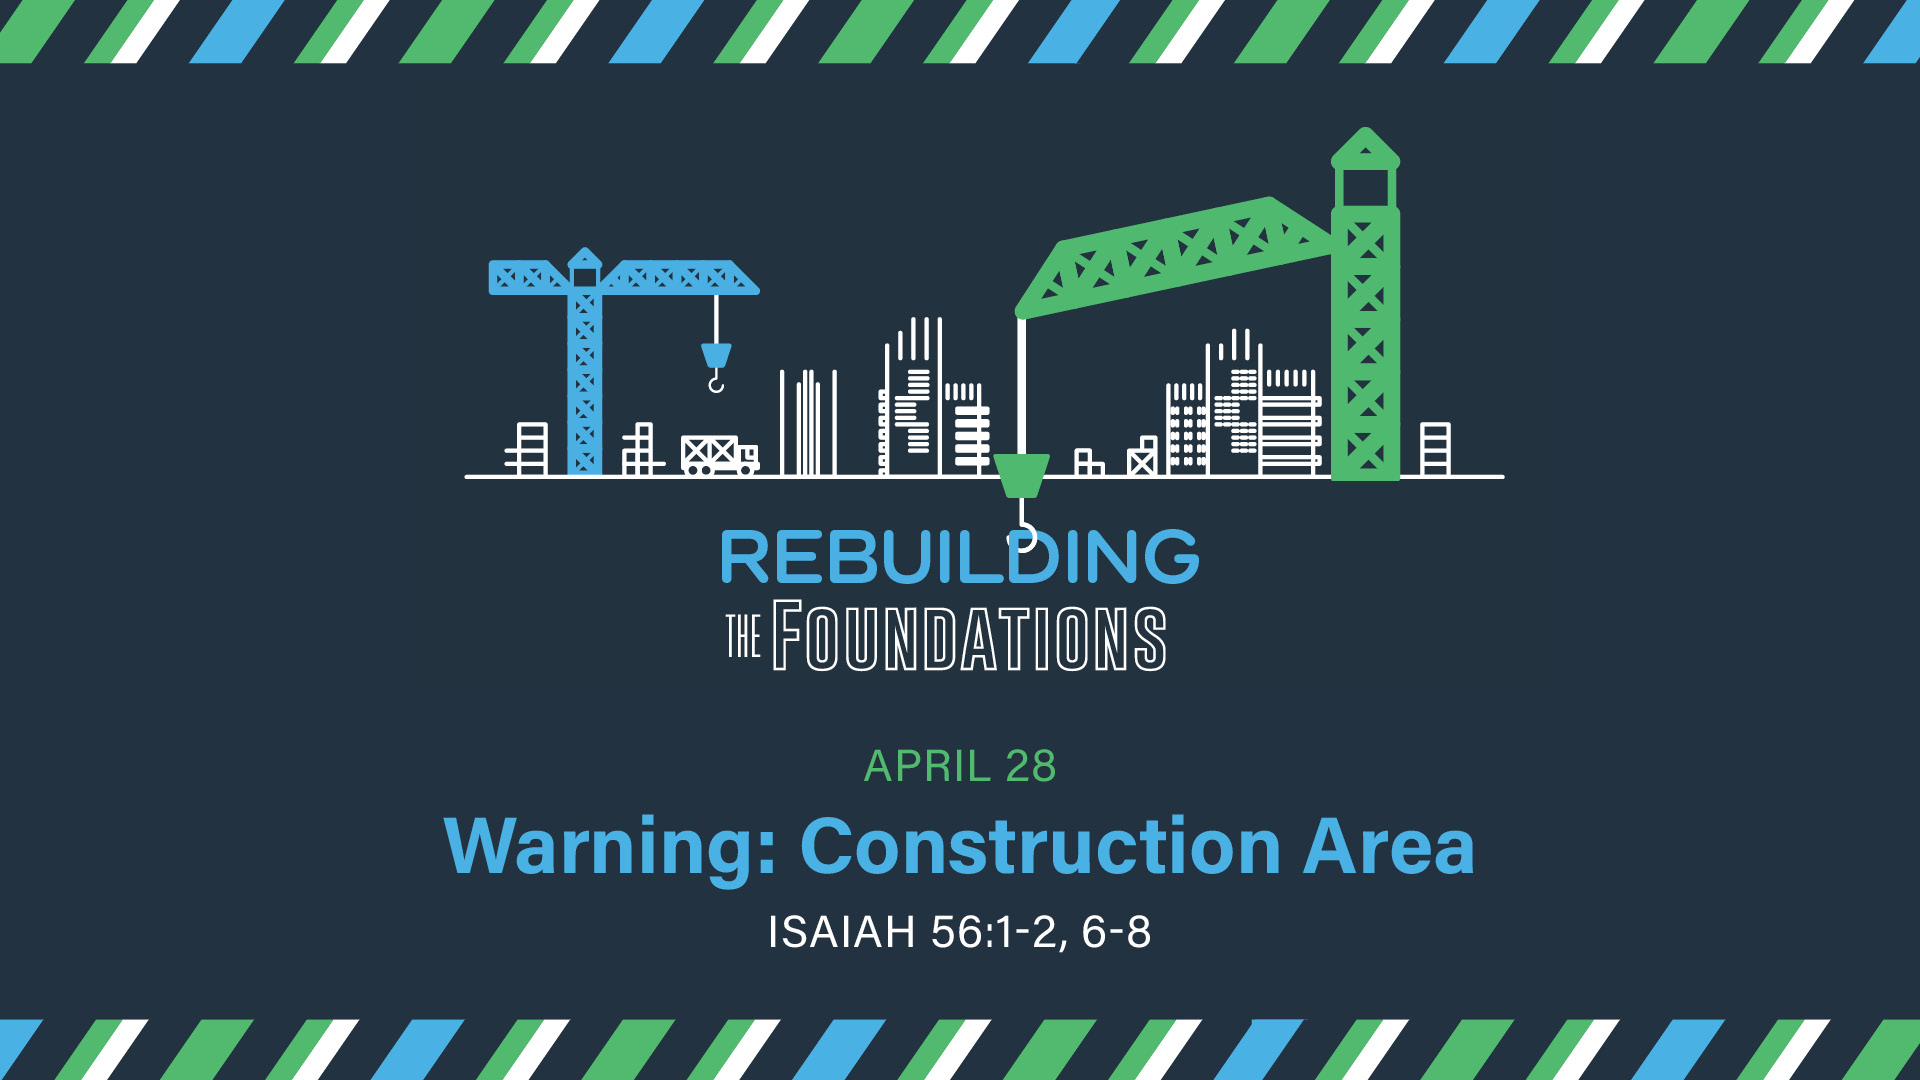 April 28 - Rebuilding the Foundations: Warning: Construction Area